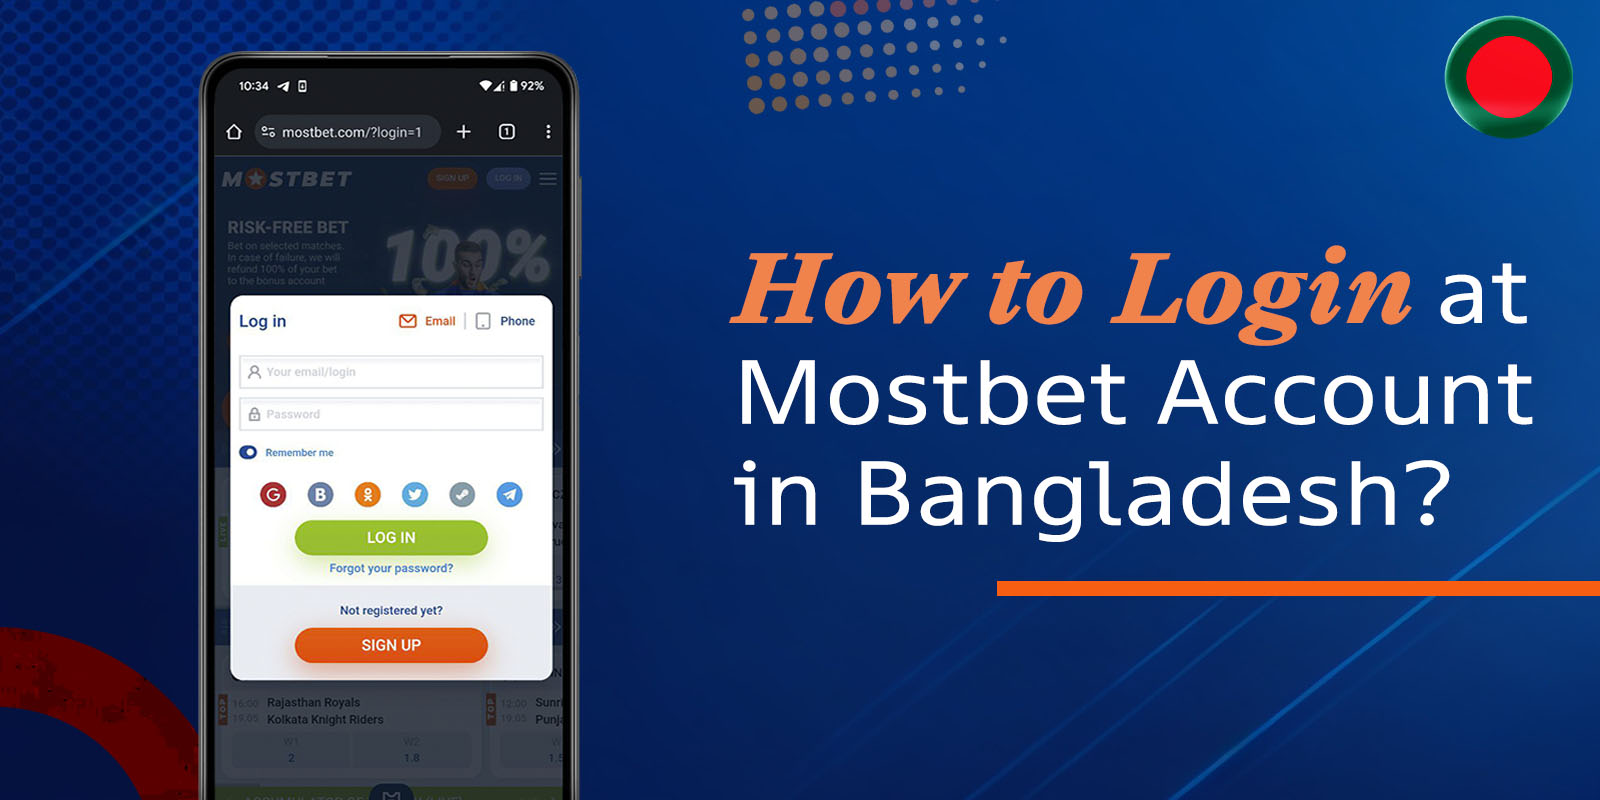 Multiple ways to access Mostbet’s Bangladesh account